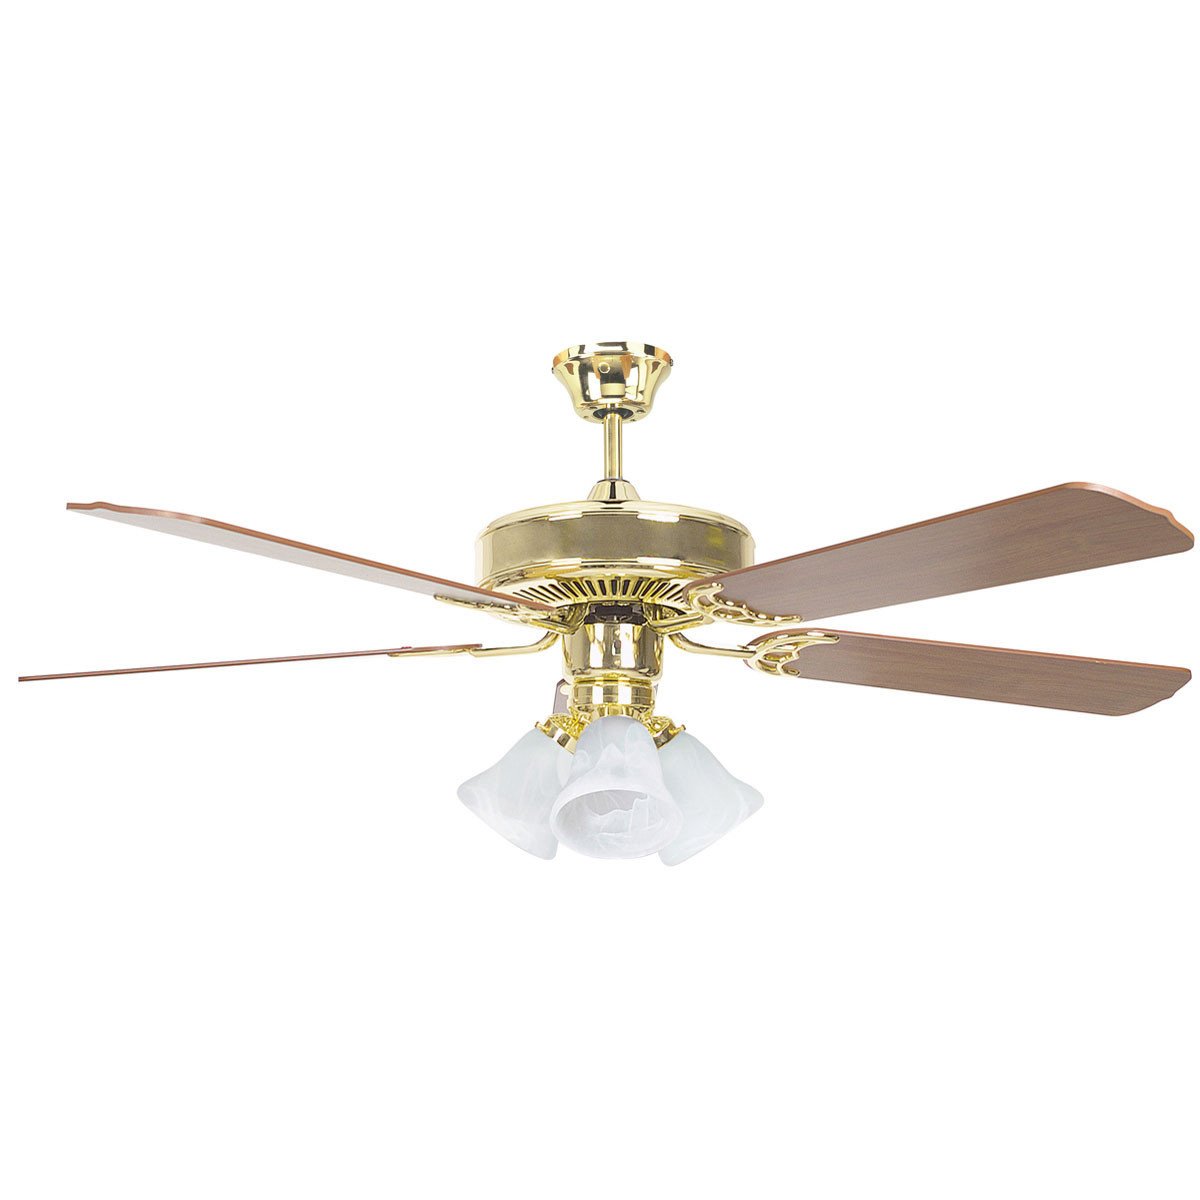 Concord Fans 52" Heritage Home Elegant Polished Brass Ceiling Fan with 3 Lights